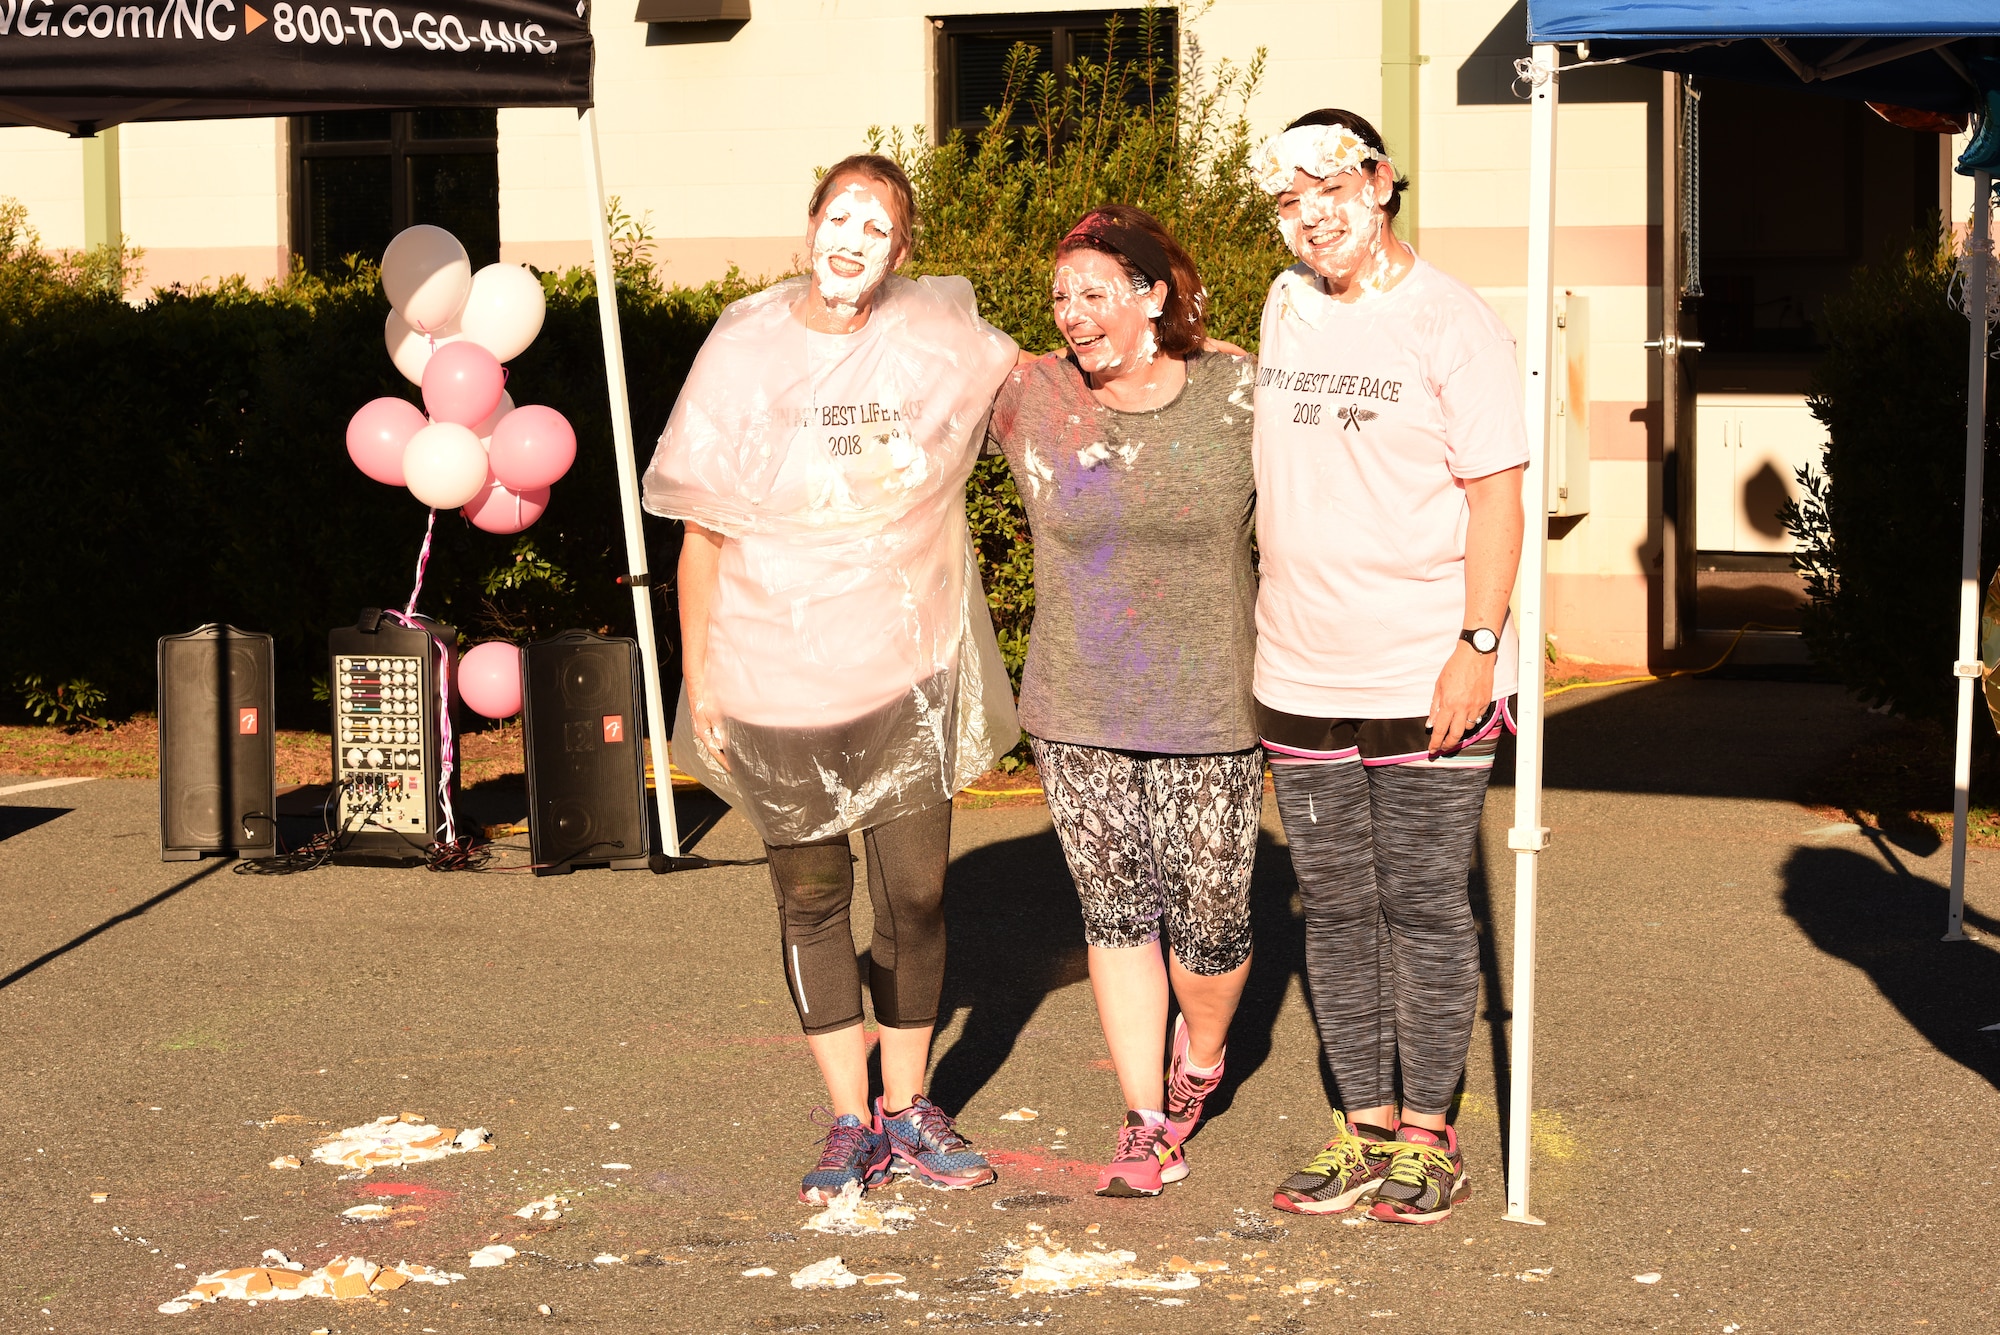 U.S. Air Force Col. Bryony A. Terrell, 145th Airlift Wing commander (left), Lt. Col. Lisa Kirk, 145th Mission Support Group commander (center), and Lt. Col. Karen Shook, 145th Maintenance Group commander (right), pose together after being pied in the face for a fundraising event following a ‘Living’ My Best Life’ Color Race, held at the North Carolina Air National Guard (NCANG) Base, Charlotte Douglas International Airport, Nov. 3, 2018. The Color Run, put together by the NCANG Recruiting Office, honors recently deceased U.S. Air Force Recruiter Master Sgt. Valanda Pettis, following her battle with cancer. Master Sgt. Pettis was believed by many to have a colorful personality and would often be heard singing, ‘Livin’ My Best Life,’ during the good and bad days; a true testament to her strength.